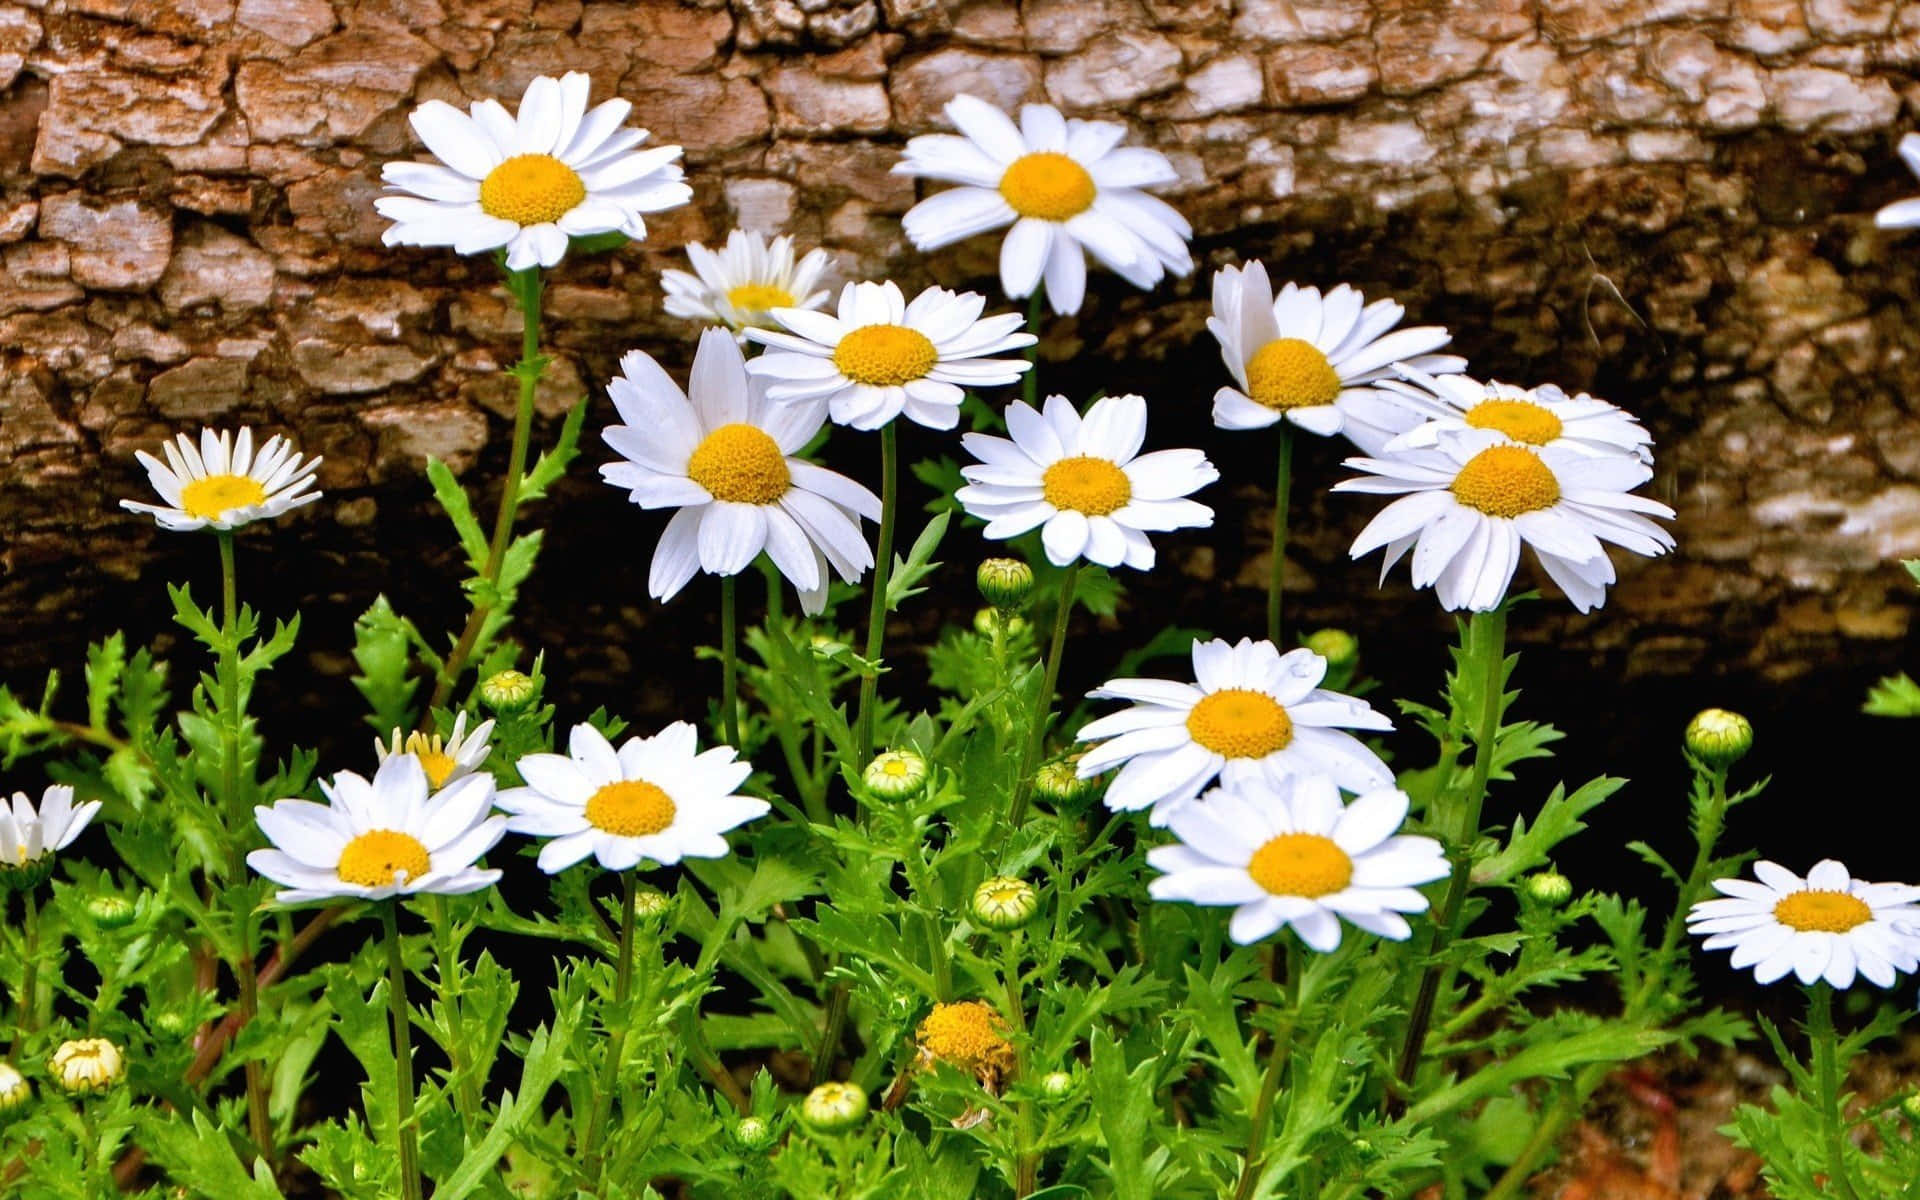 White Daisies Growing In The Grass